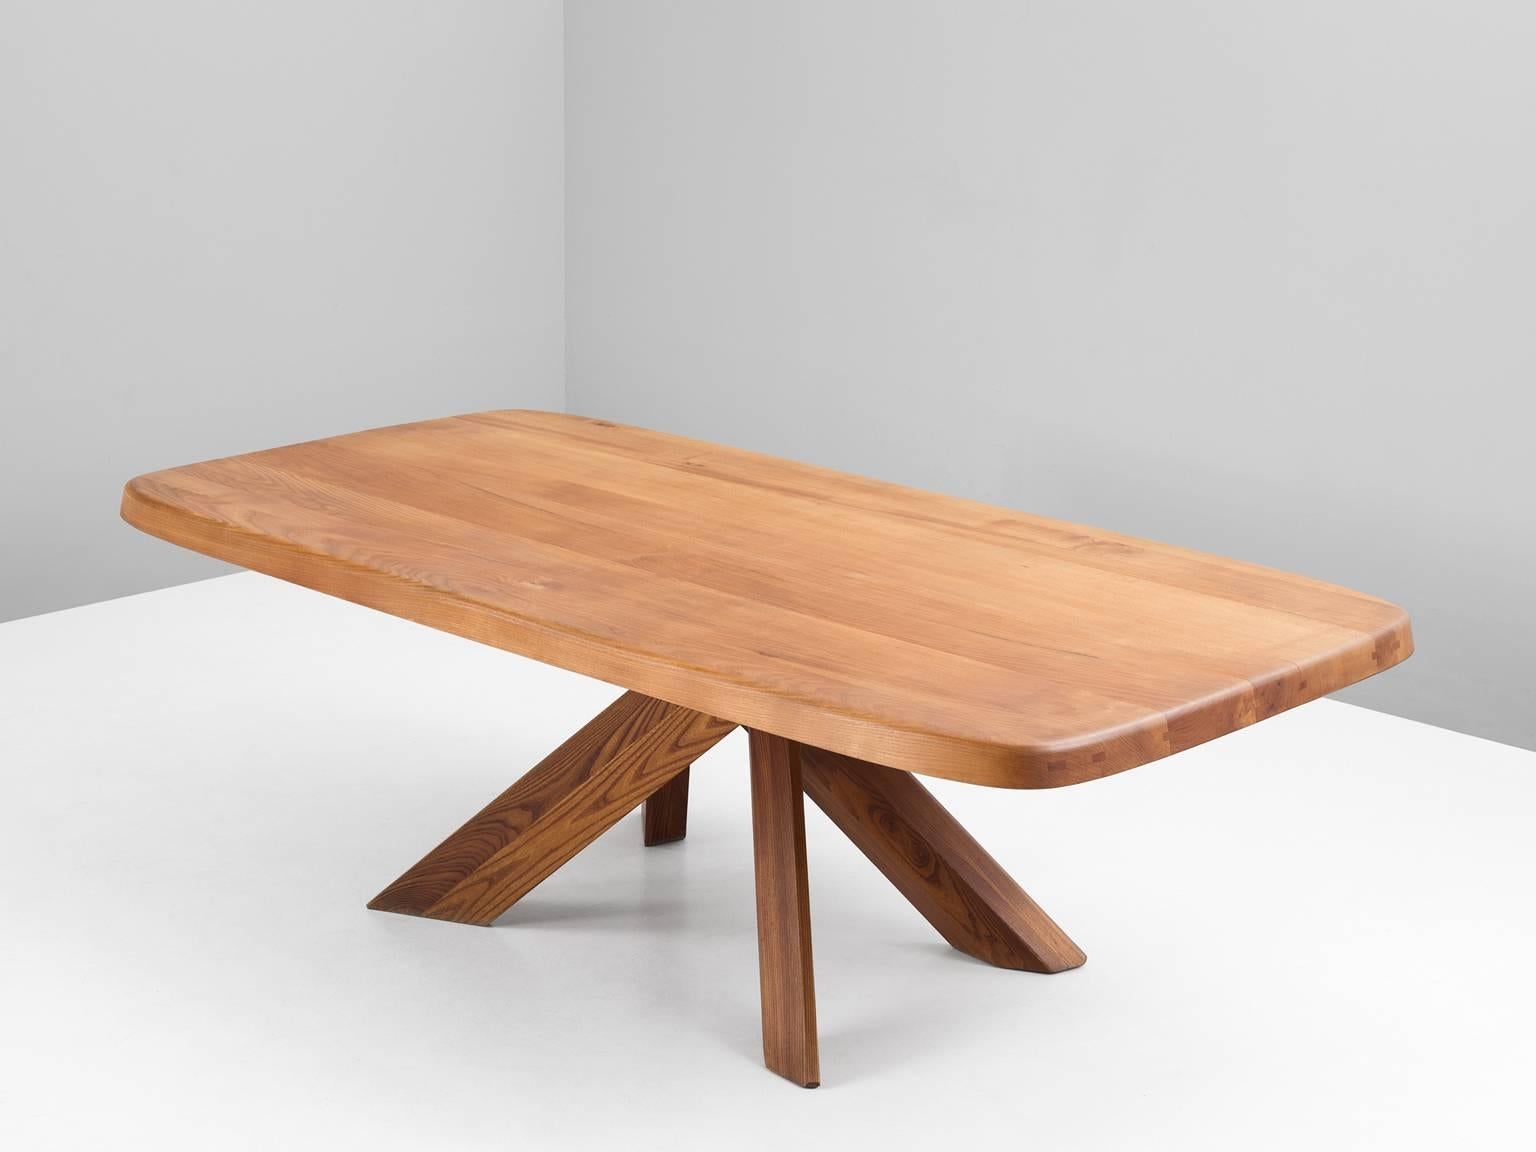 Dining table model T35D, in elm, by Pierre Chapo, France, 1960s. 

Very well crafted table in wonderful original condition. The basic design and construction, as well as the use of solid pinewood characterizes the work of Chapo. The table shows